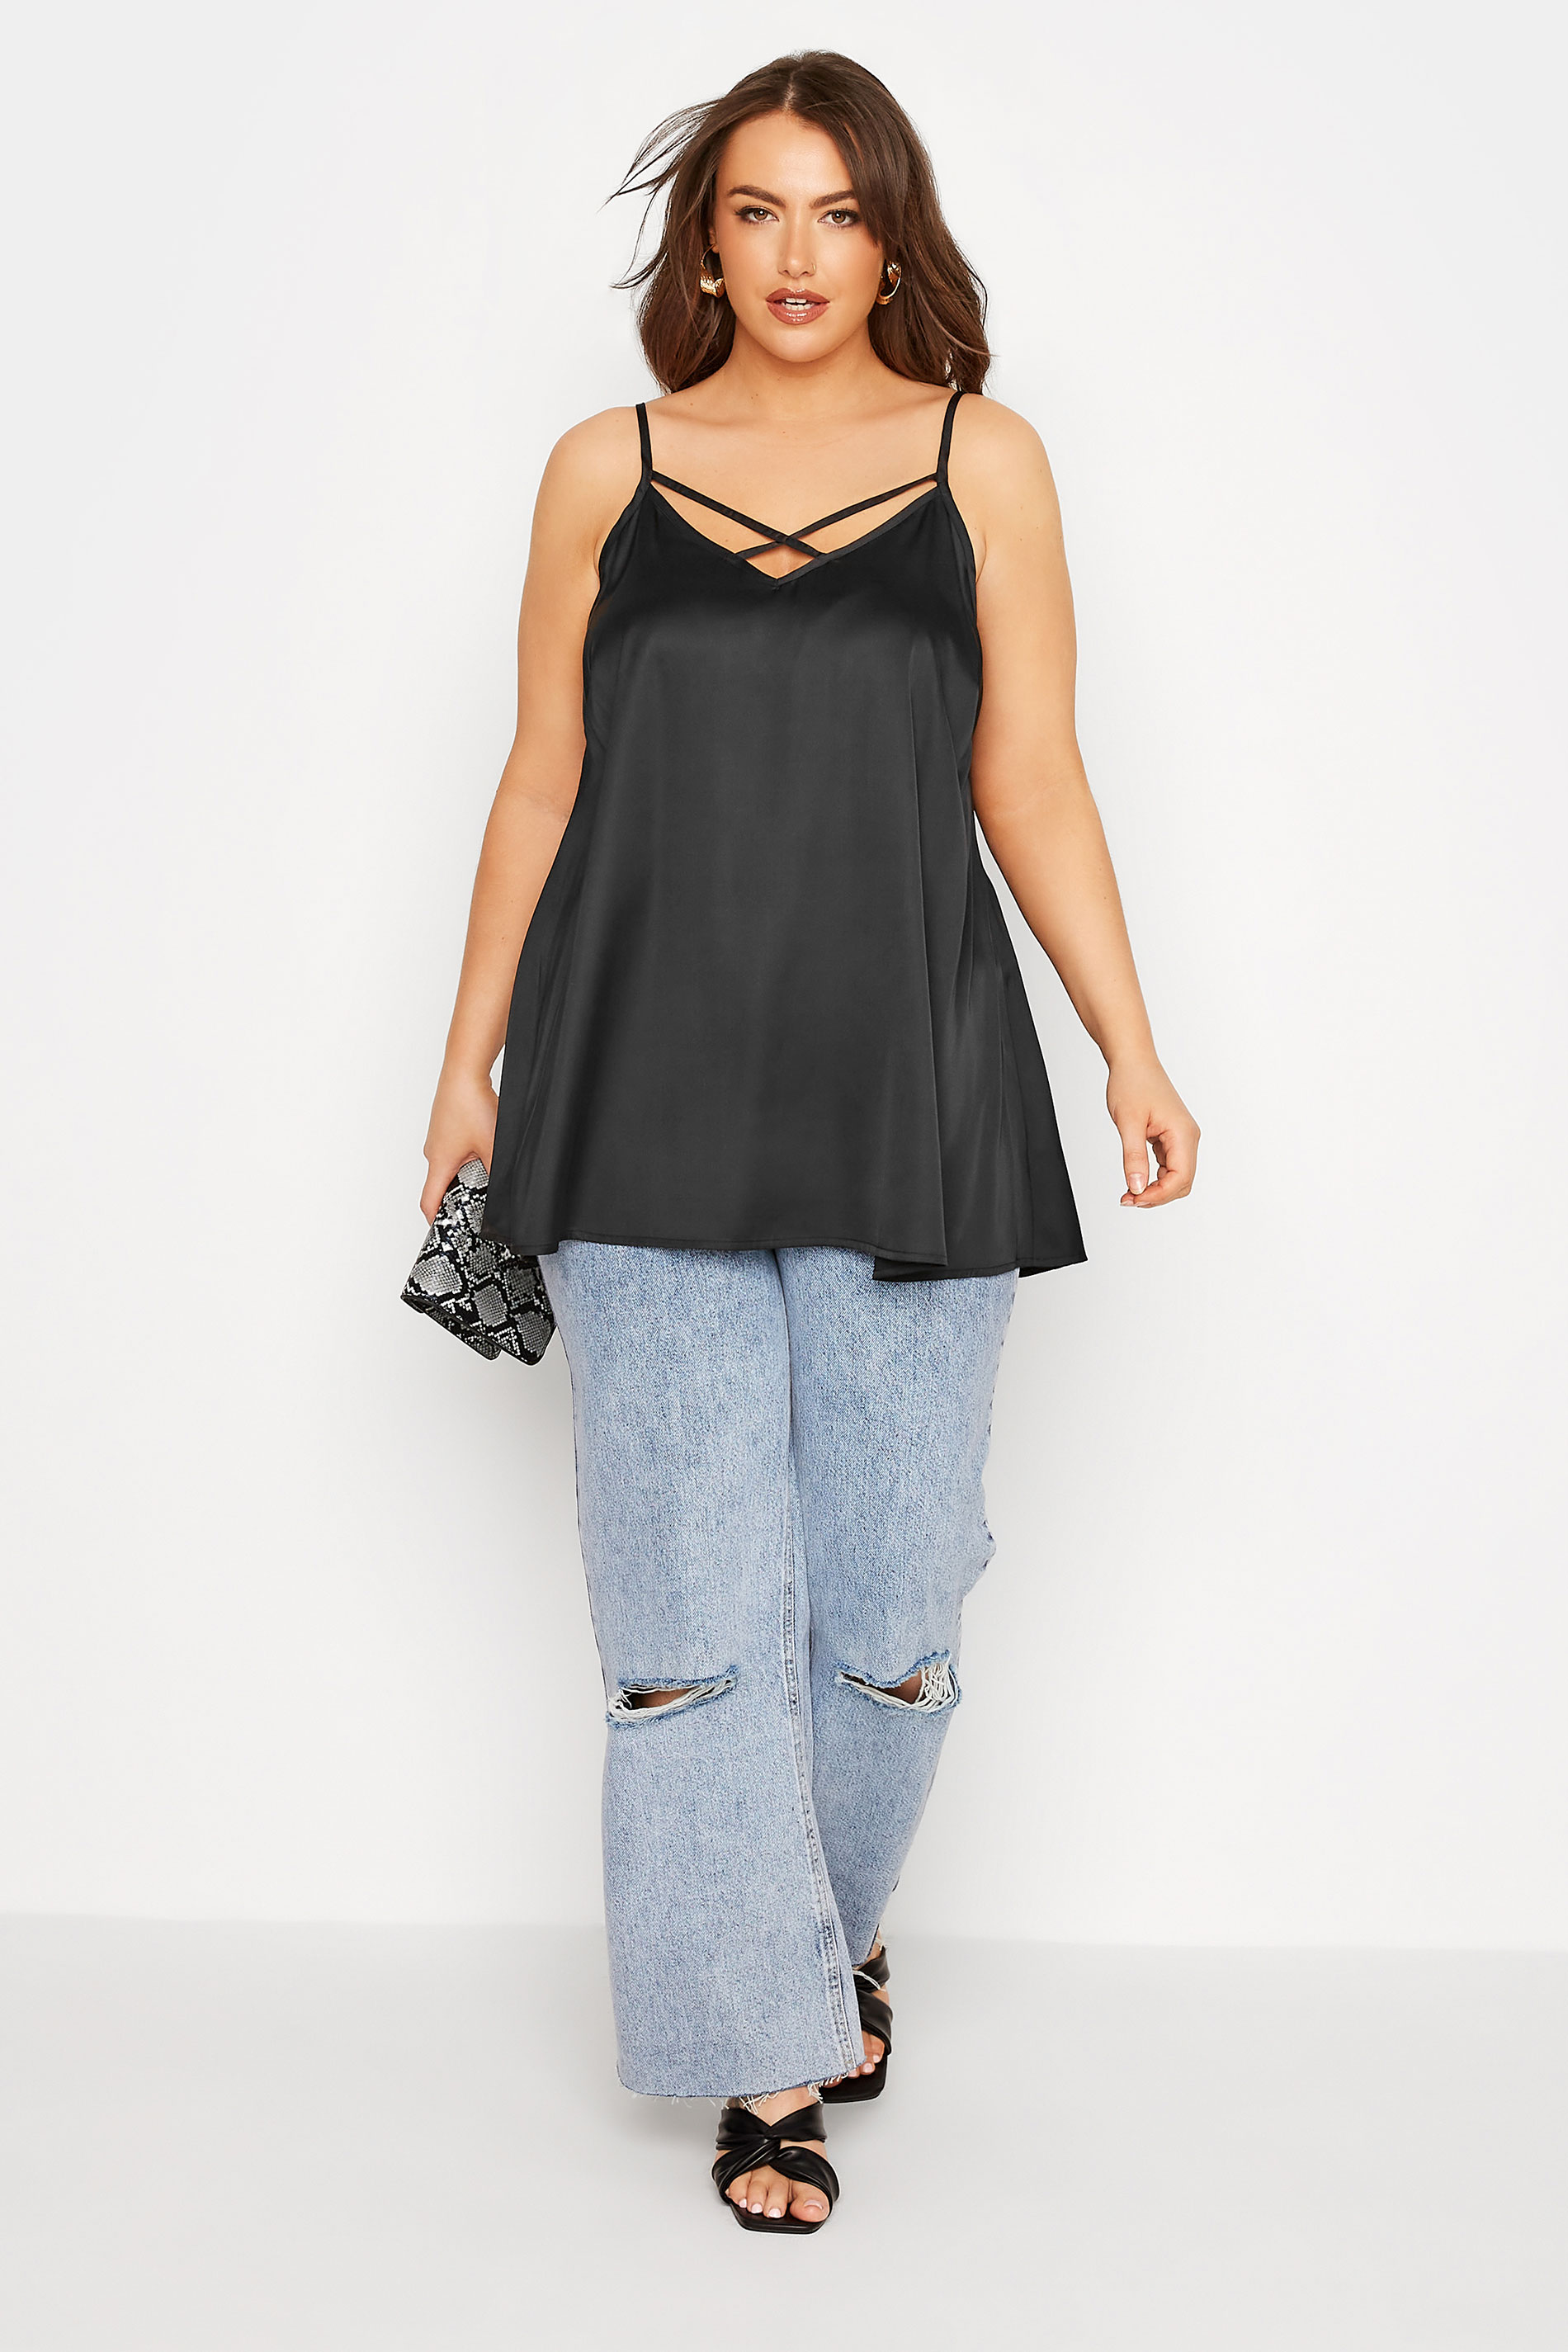 LIMITED COLLECTION Plus Size Black Satin Cami Top | Yours Clothing  2